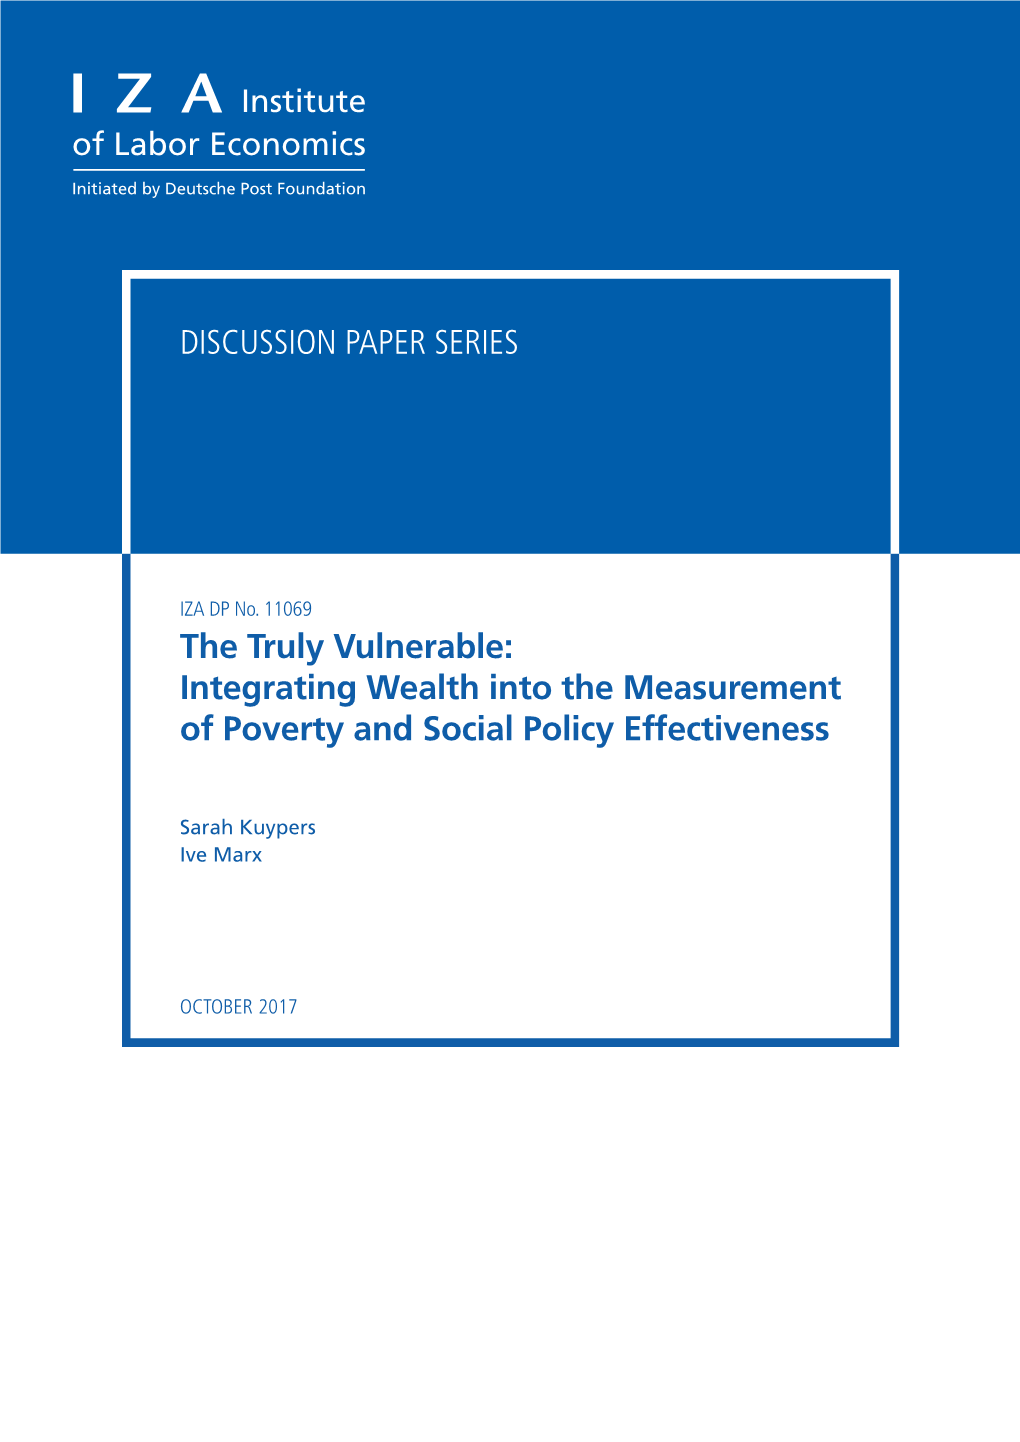 Integrating Wealth Into the Measurement of Poverty and Social Policy Effectiveness